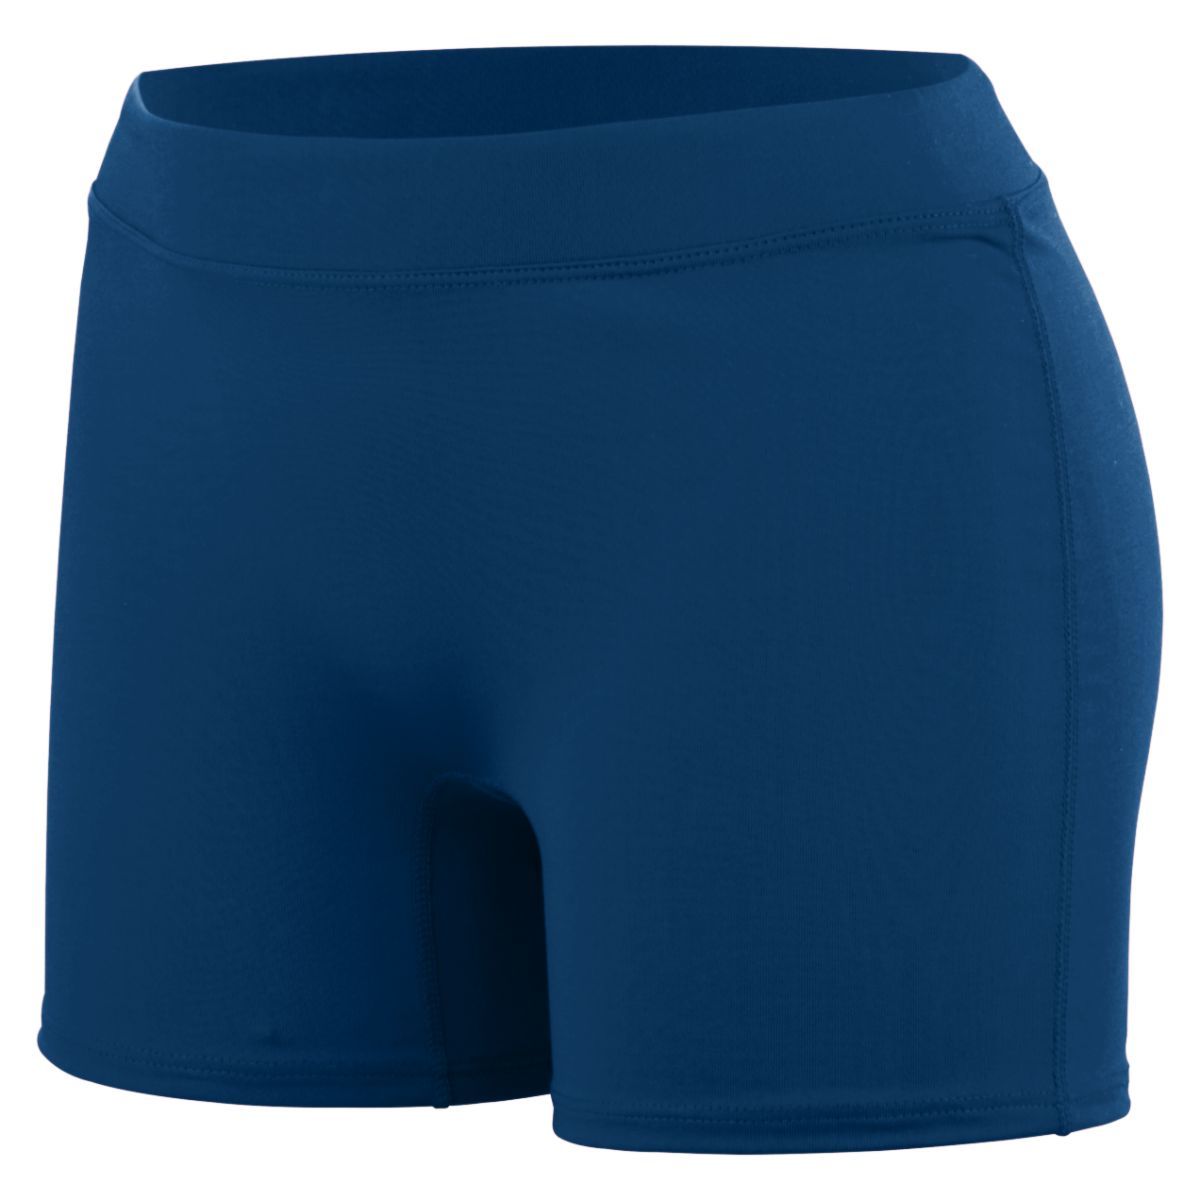 Augusta Sportswear Girls Enthuse Shorts in Navy  -Part of the Girls, Augusta-Products, Volleyball, Girls-Shorts product lines at KanaleyCreations.com